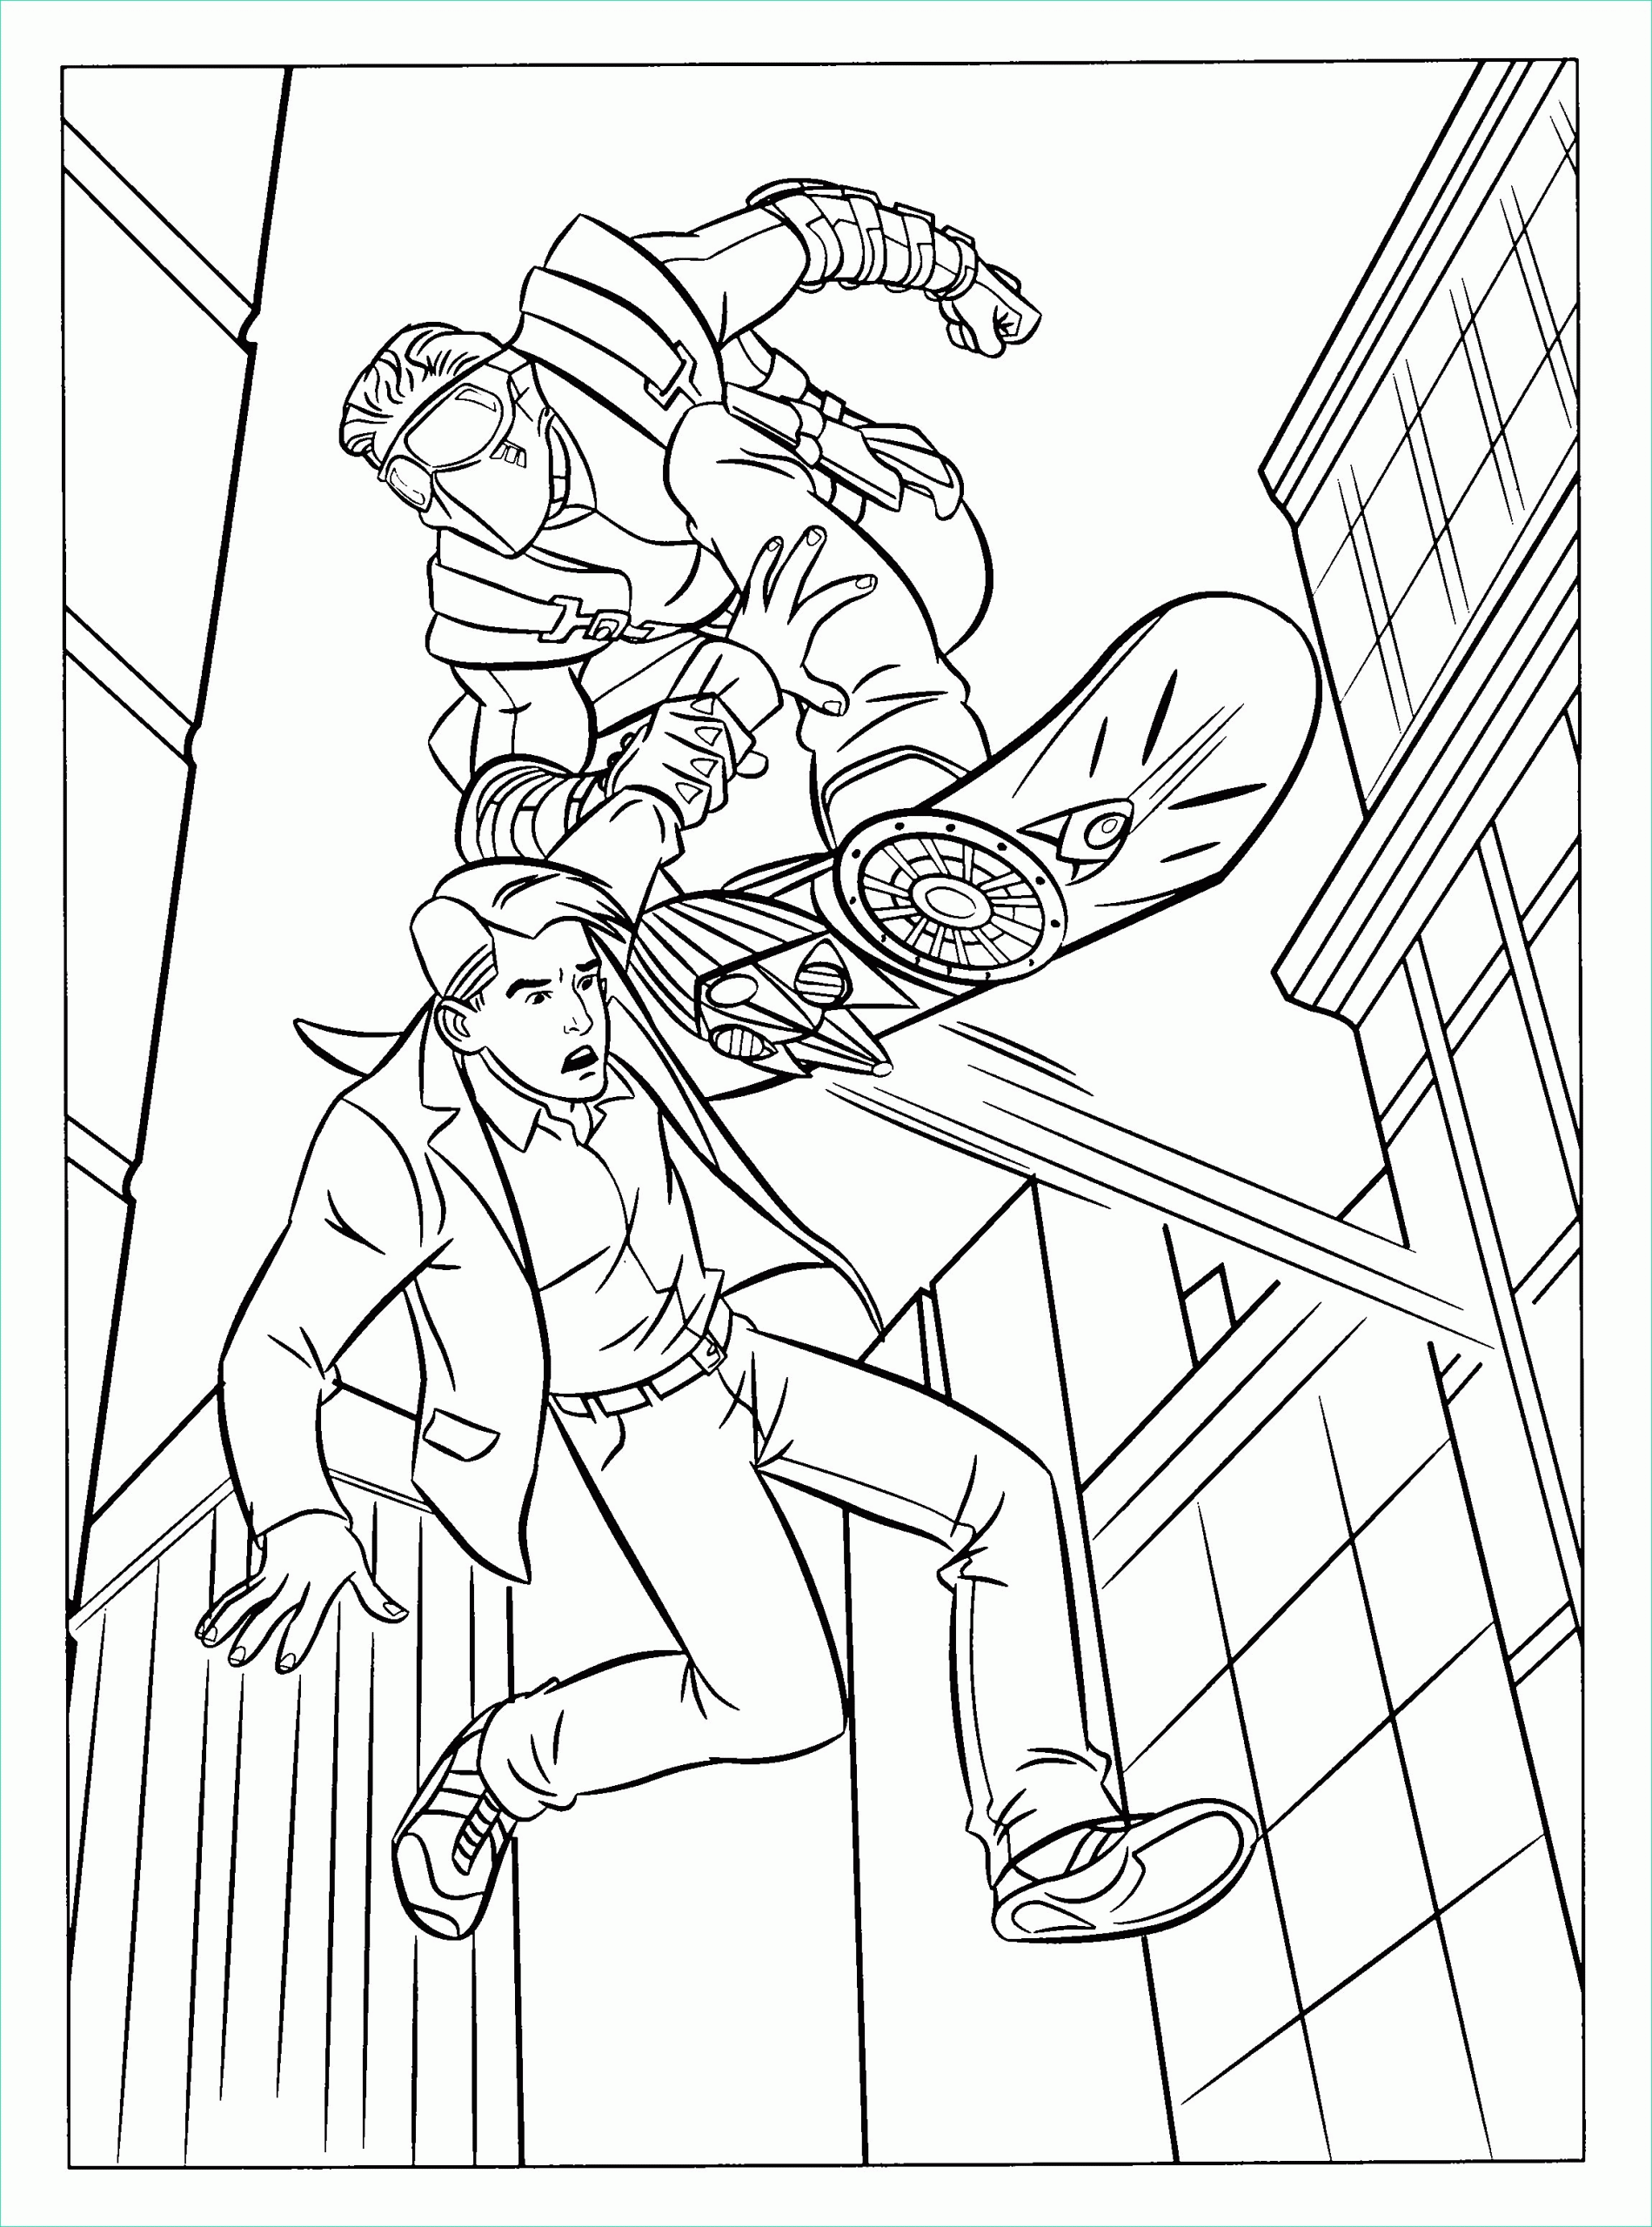 Dessin Spiderman Beau Galerie Coloring Page Spiderman 3 Coloring Pages 9